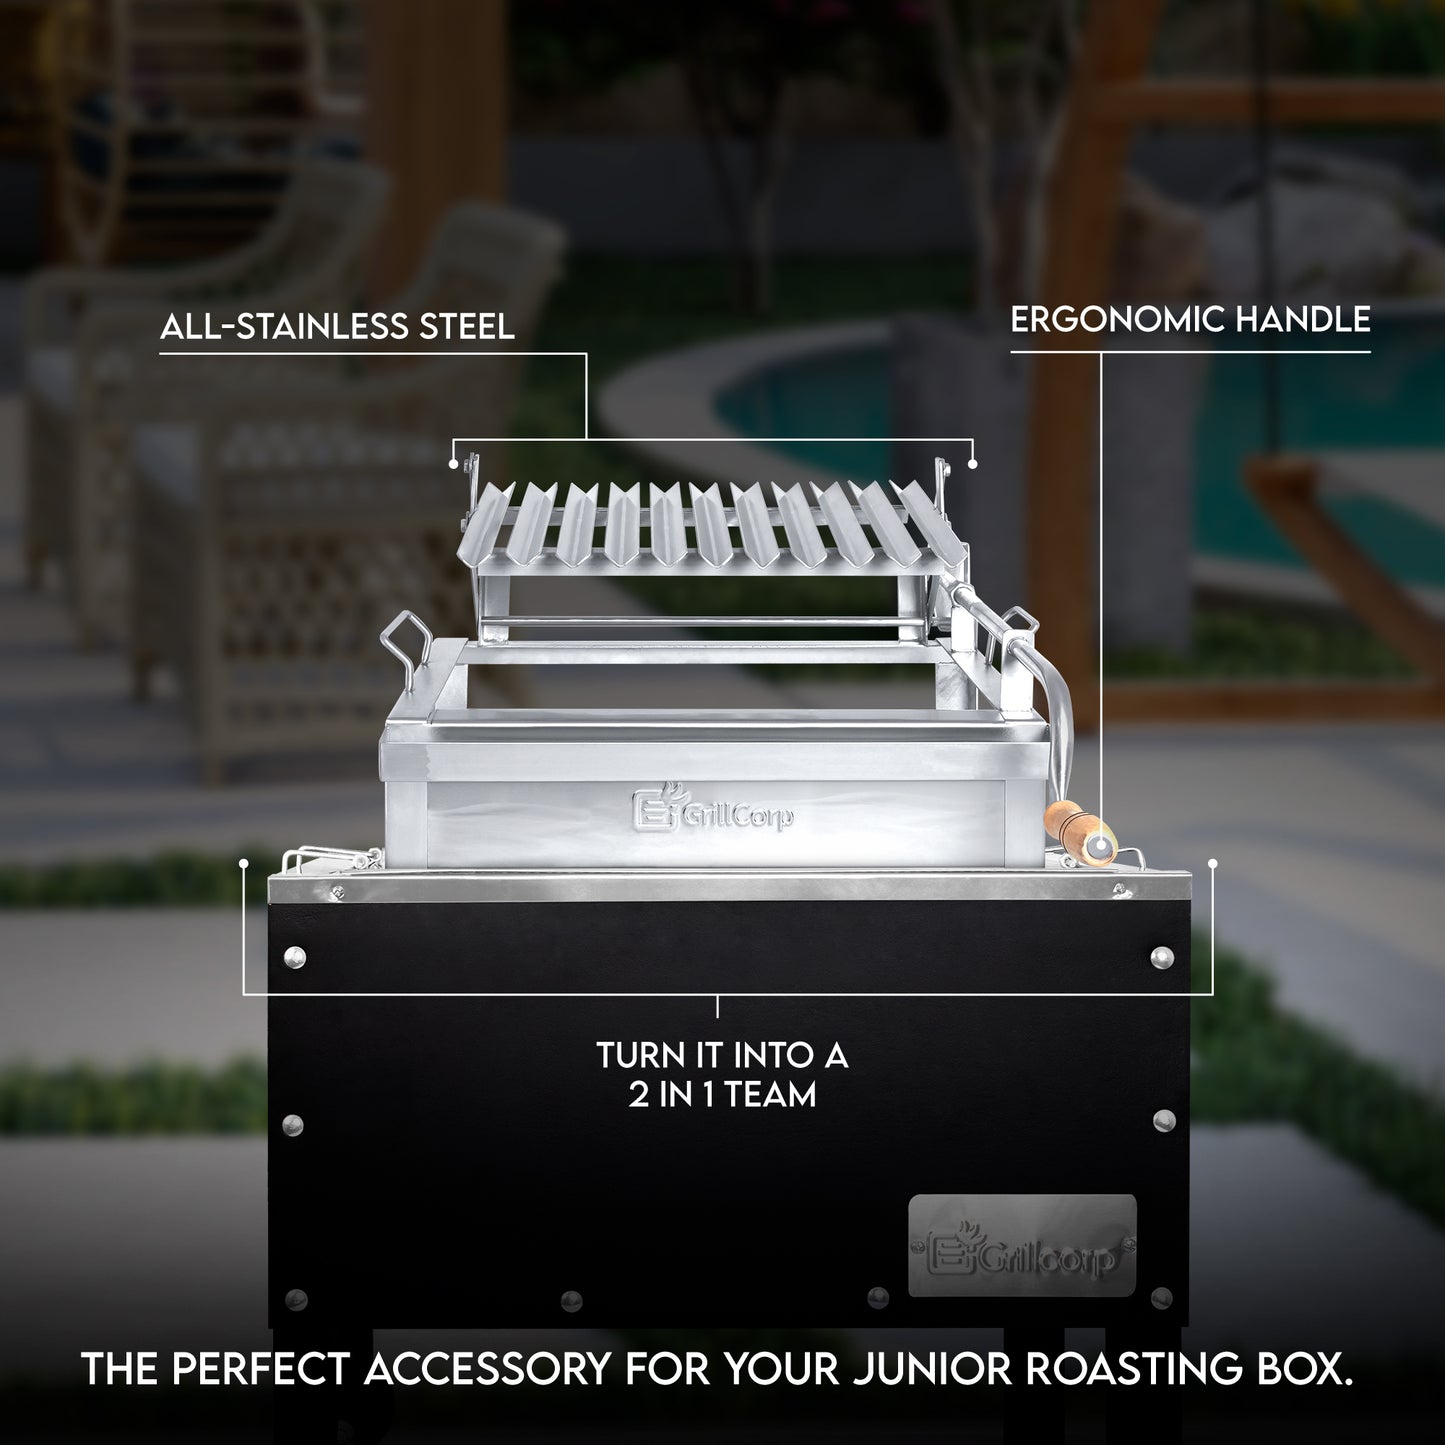 Junior Portable Grill, Built-In Grill with Accessory Lift System, made of stainless steel